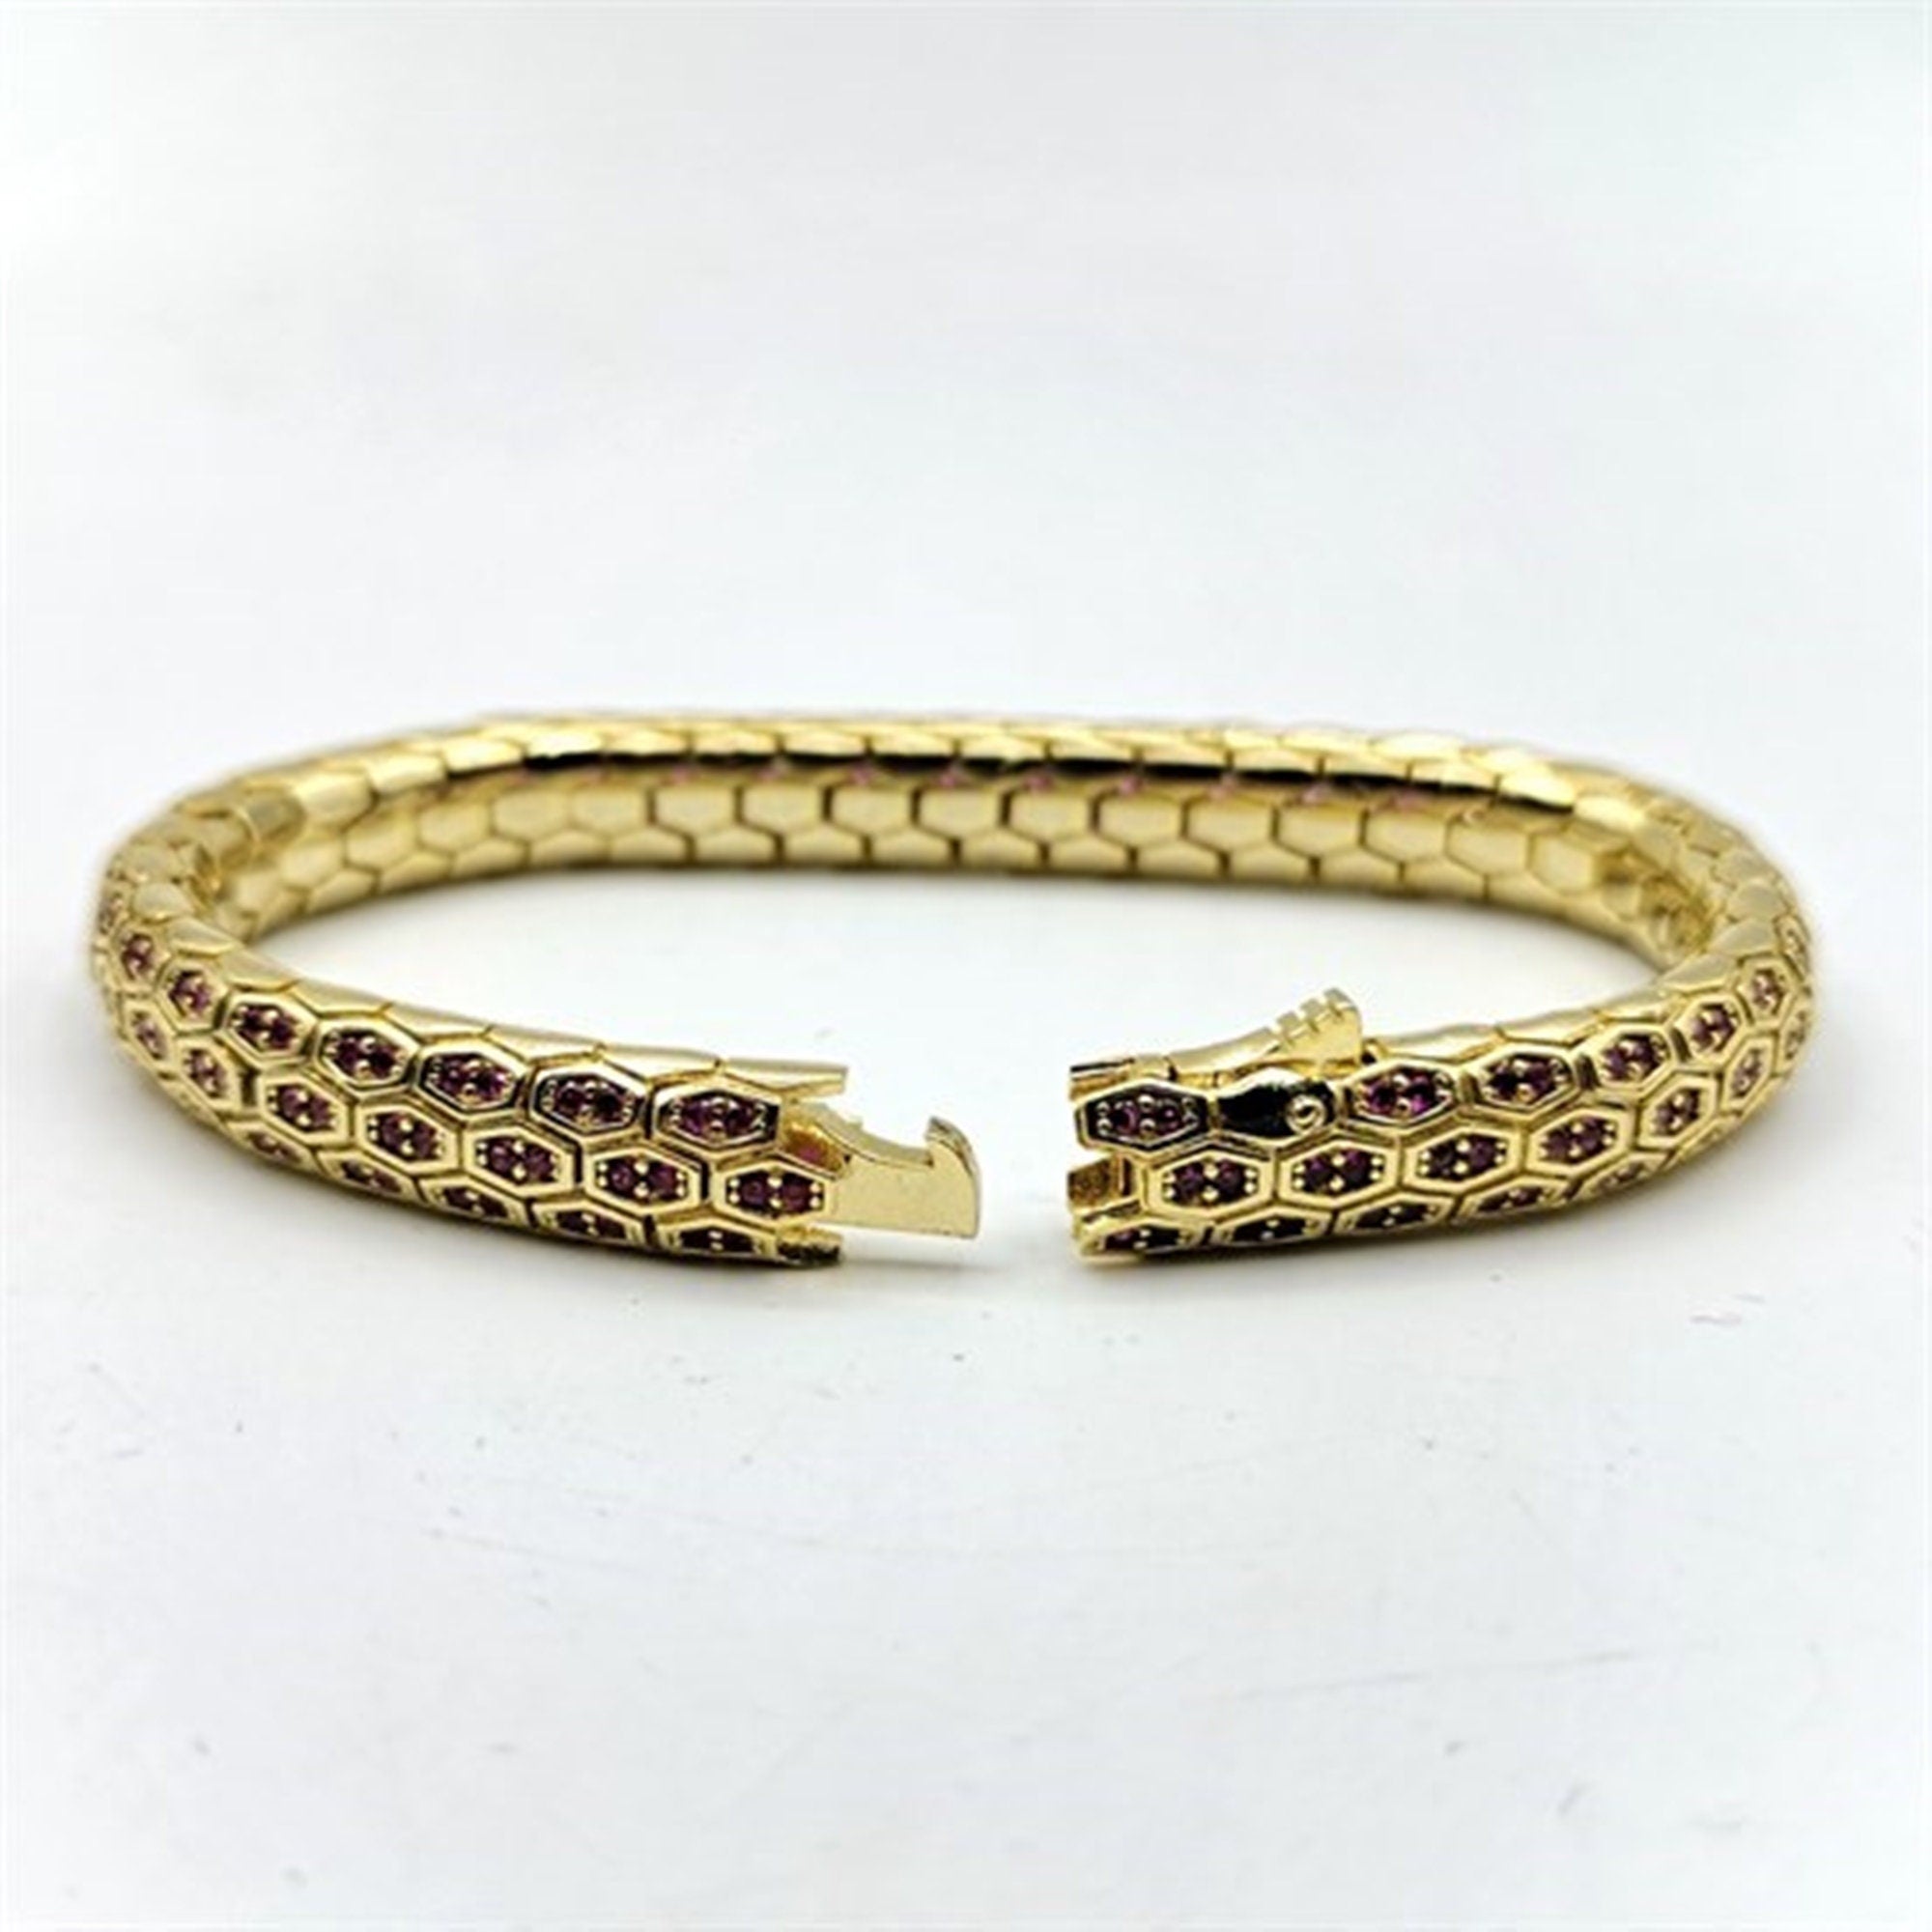 Buy Shaya by CaratLane Matchmaking Maasi Bracelet in Gold Plated 925 Silver  Online